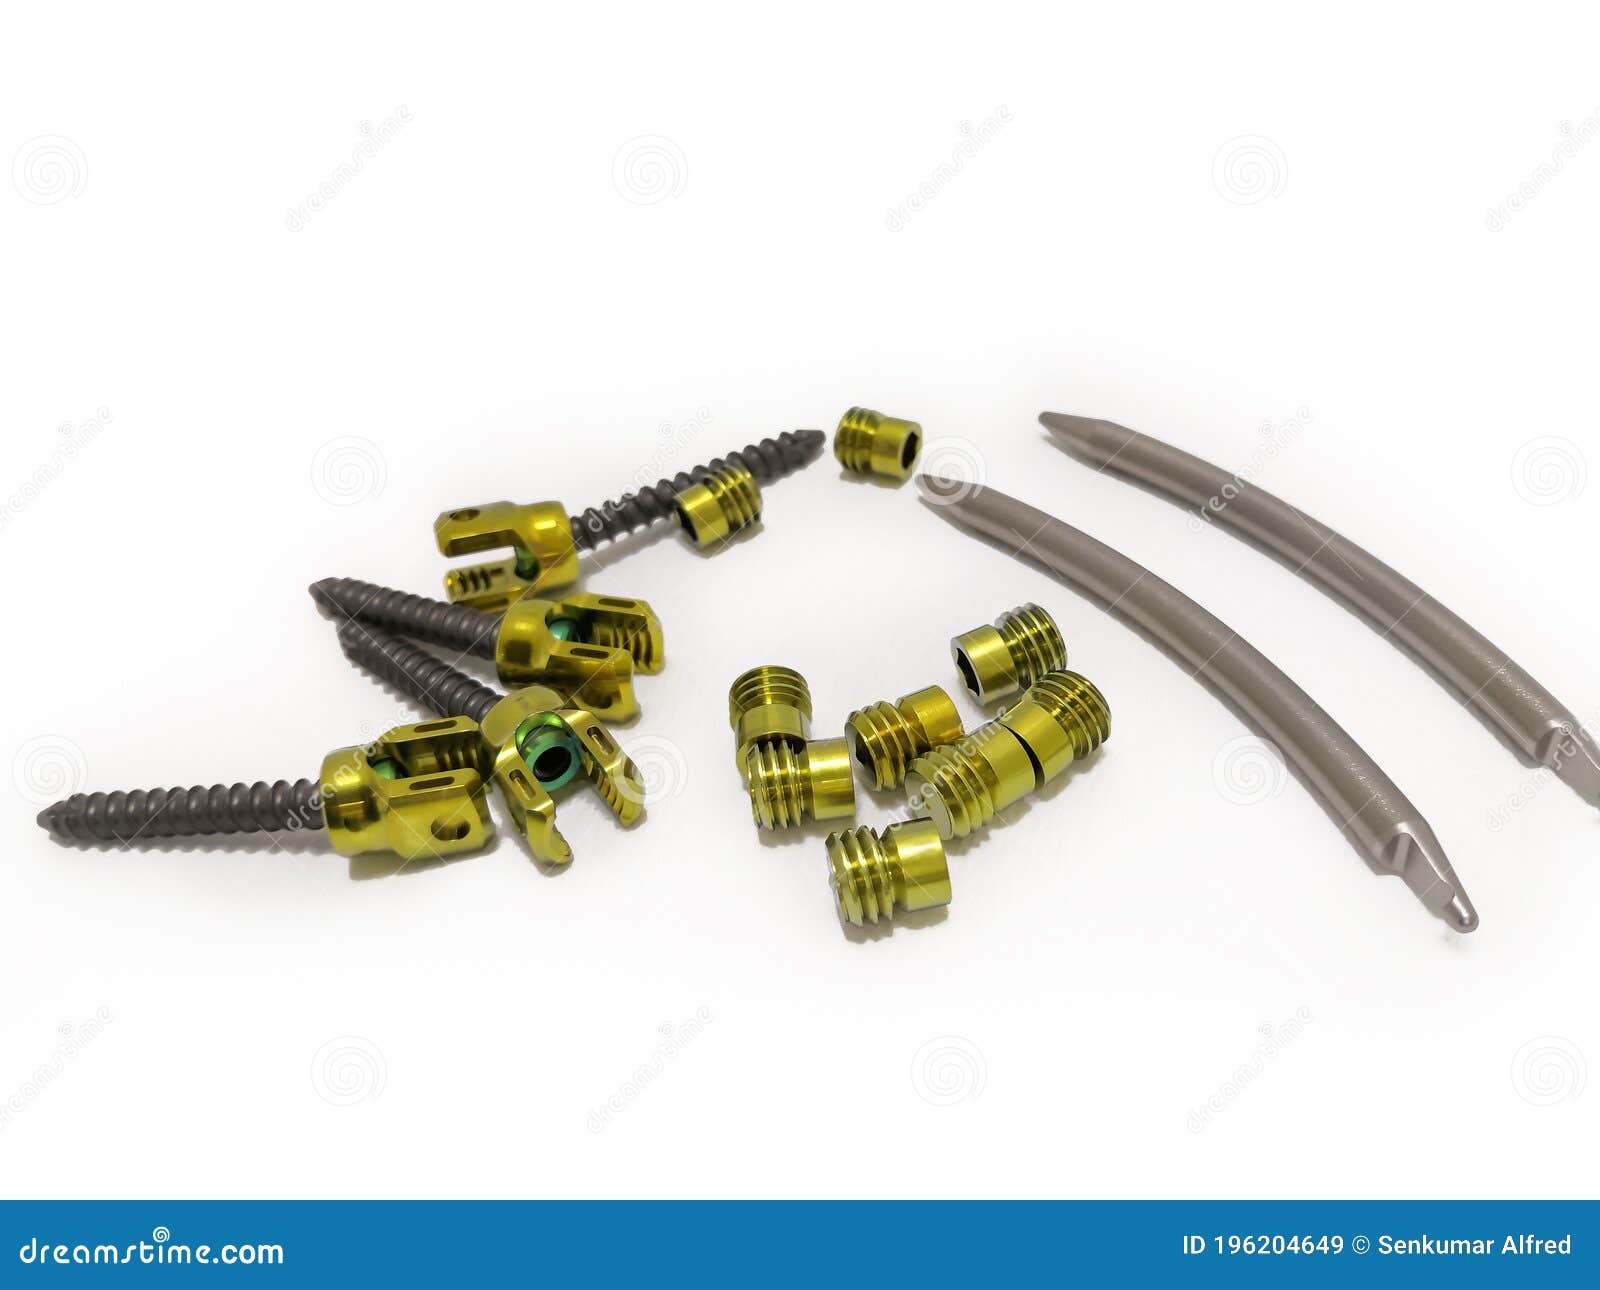 pedicle screws, nuts and rods